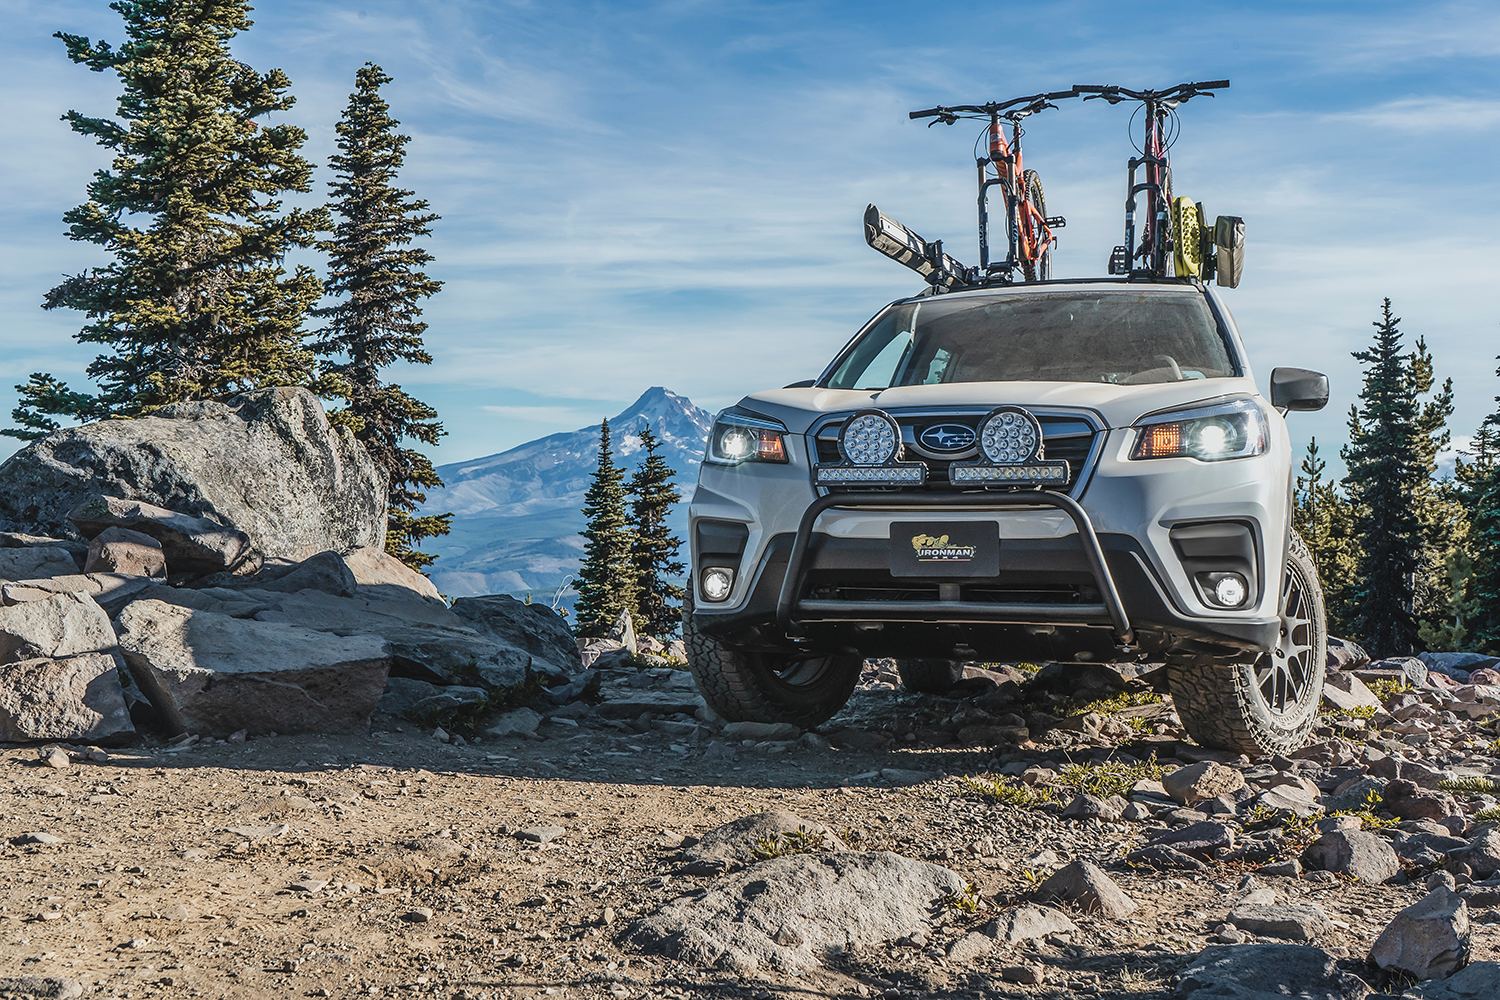 Will this lift fit a 2022 Forester Wilderness?